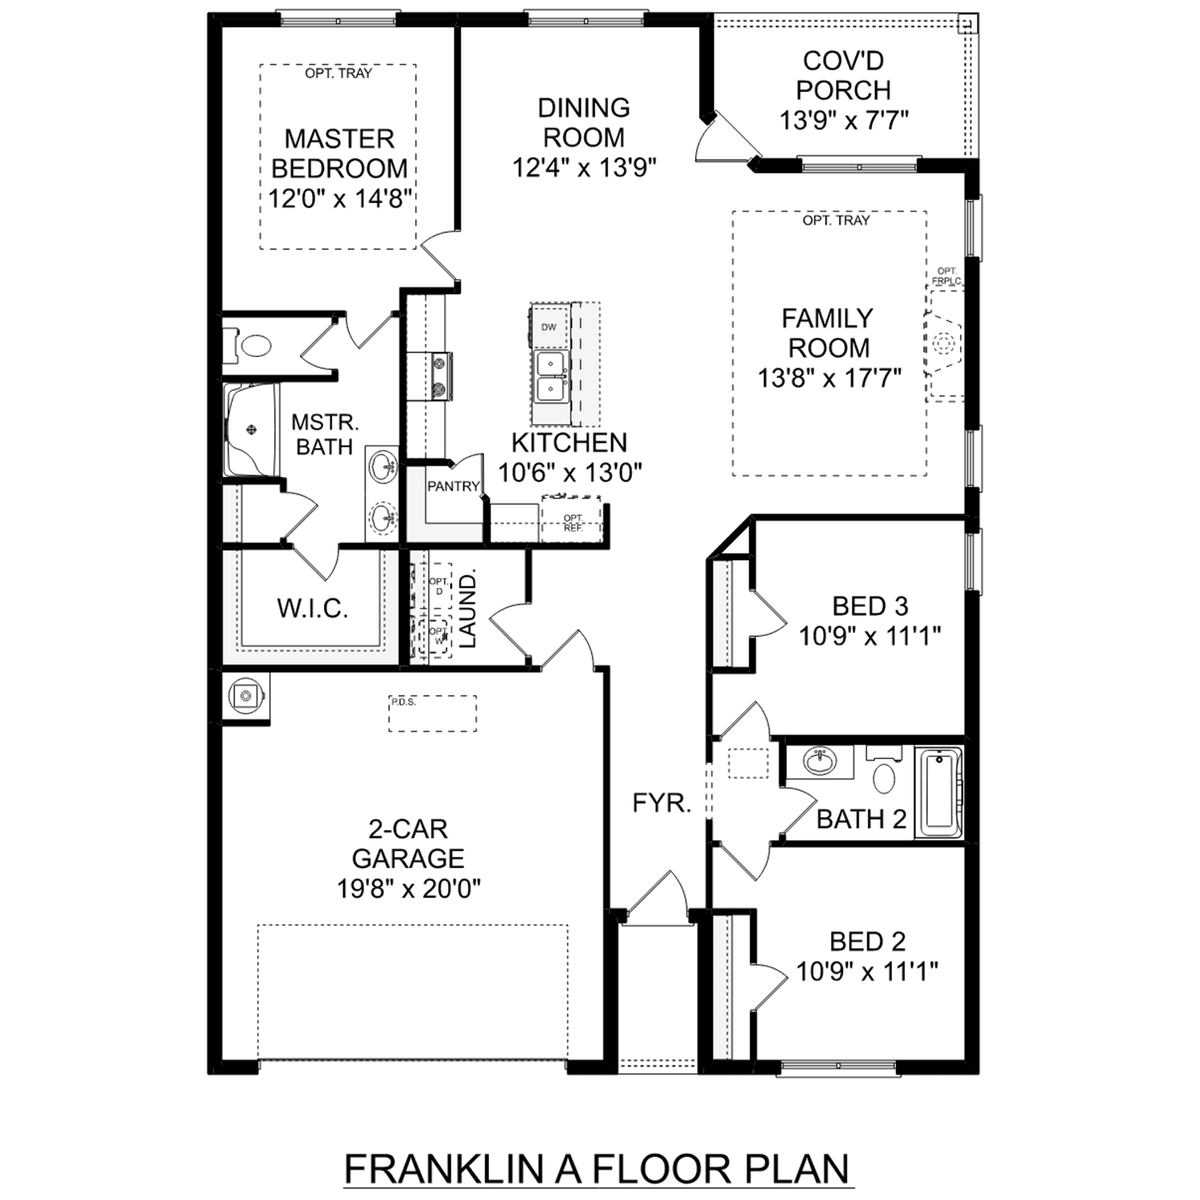 1 - The Franklin floor plan layout for 134 River Springs Court in Davidson Homes' Flint Meadows community.